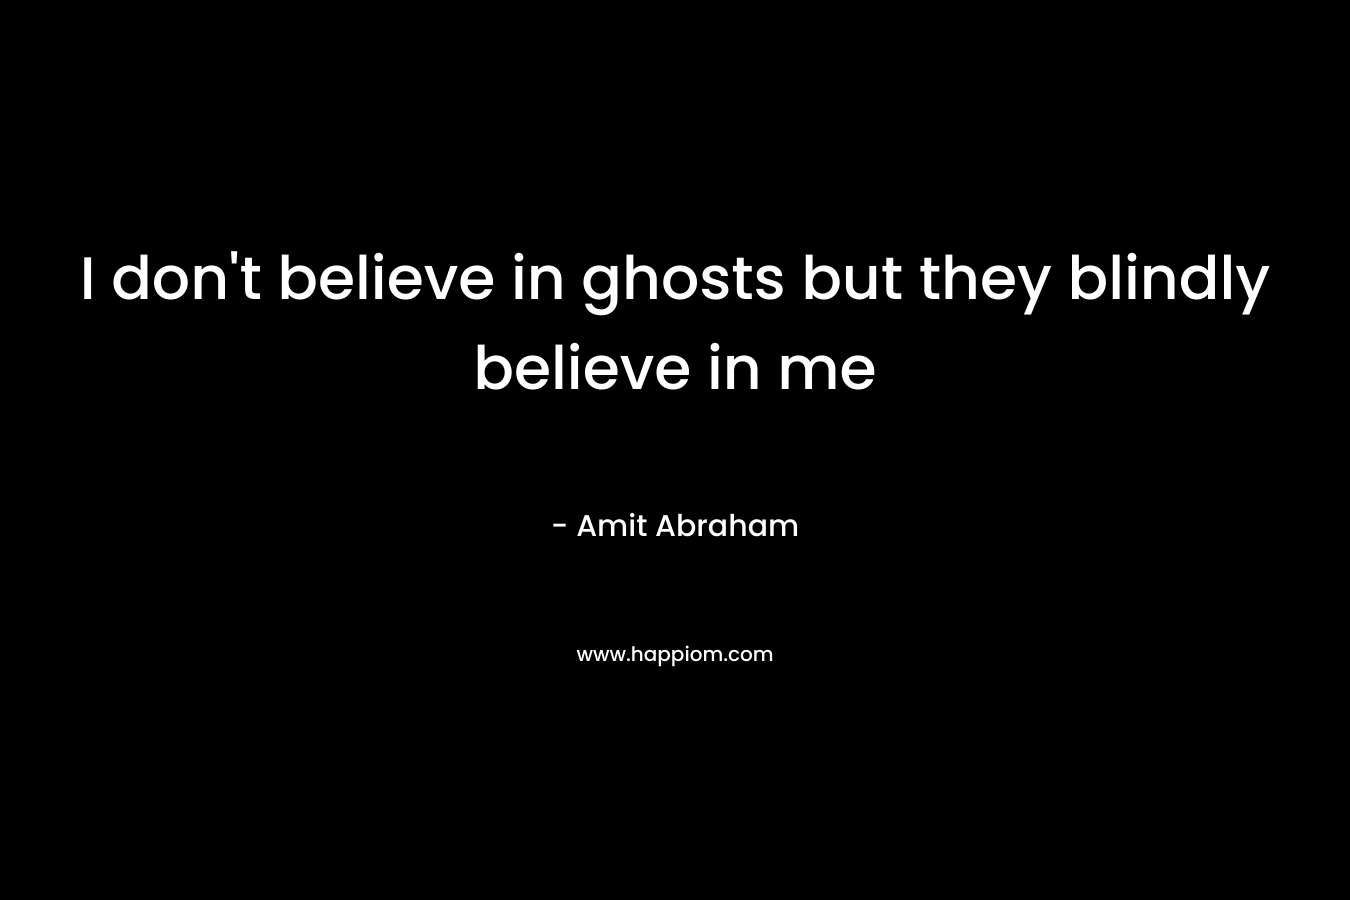 I don't believe in ghosts but they blindly believe in me